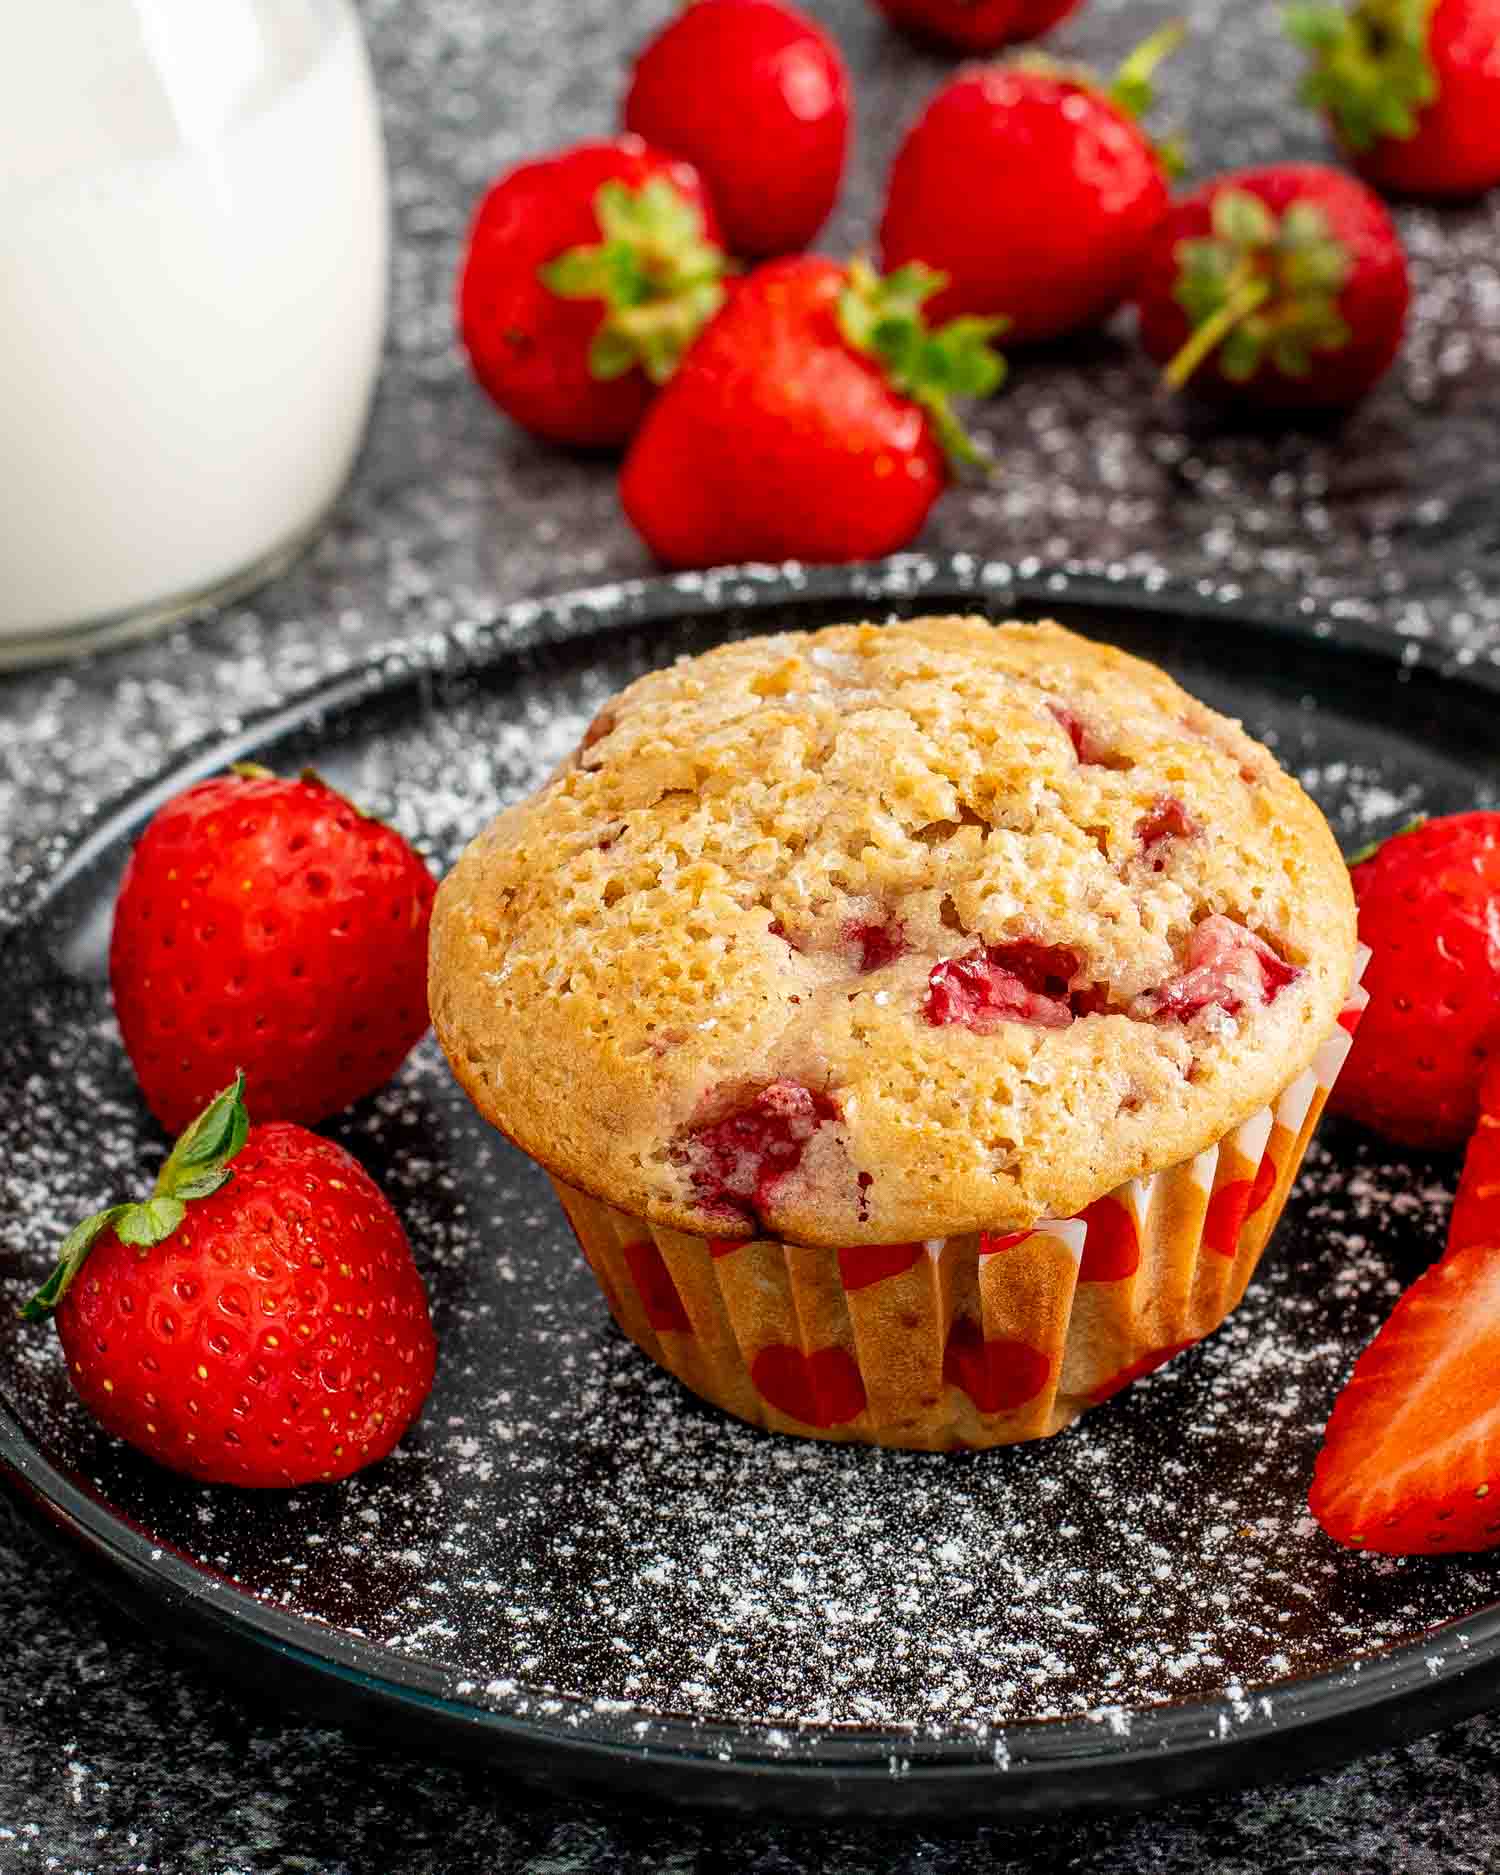 one strawberry muffin on a black plate along side some fresh strawberries.